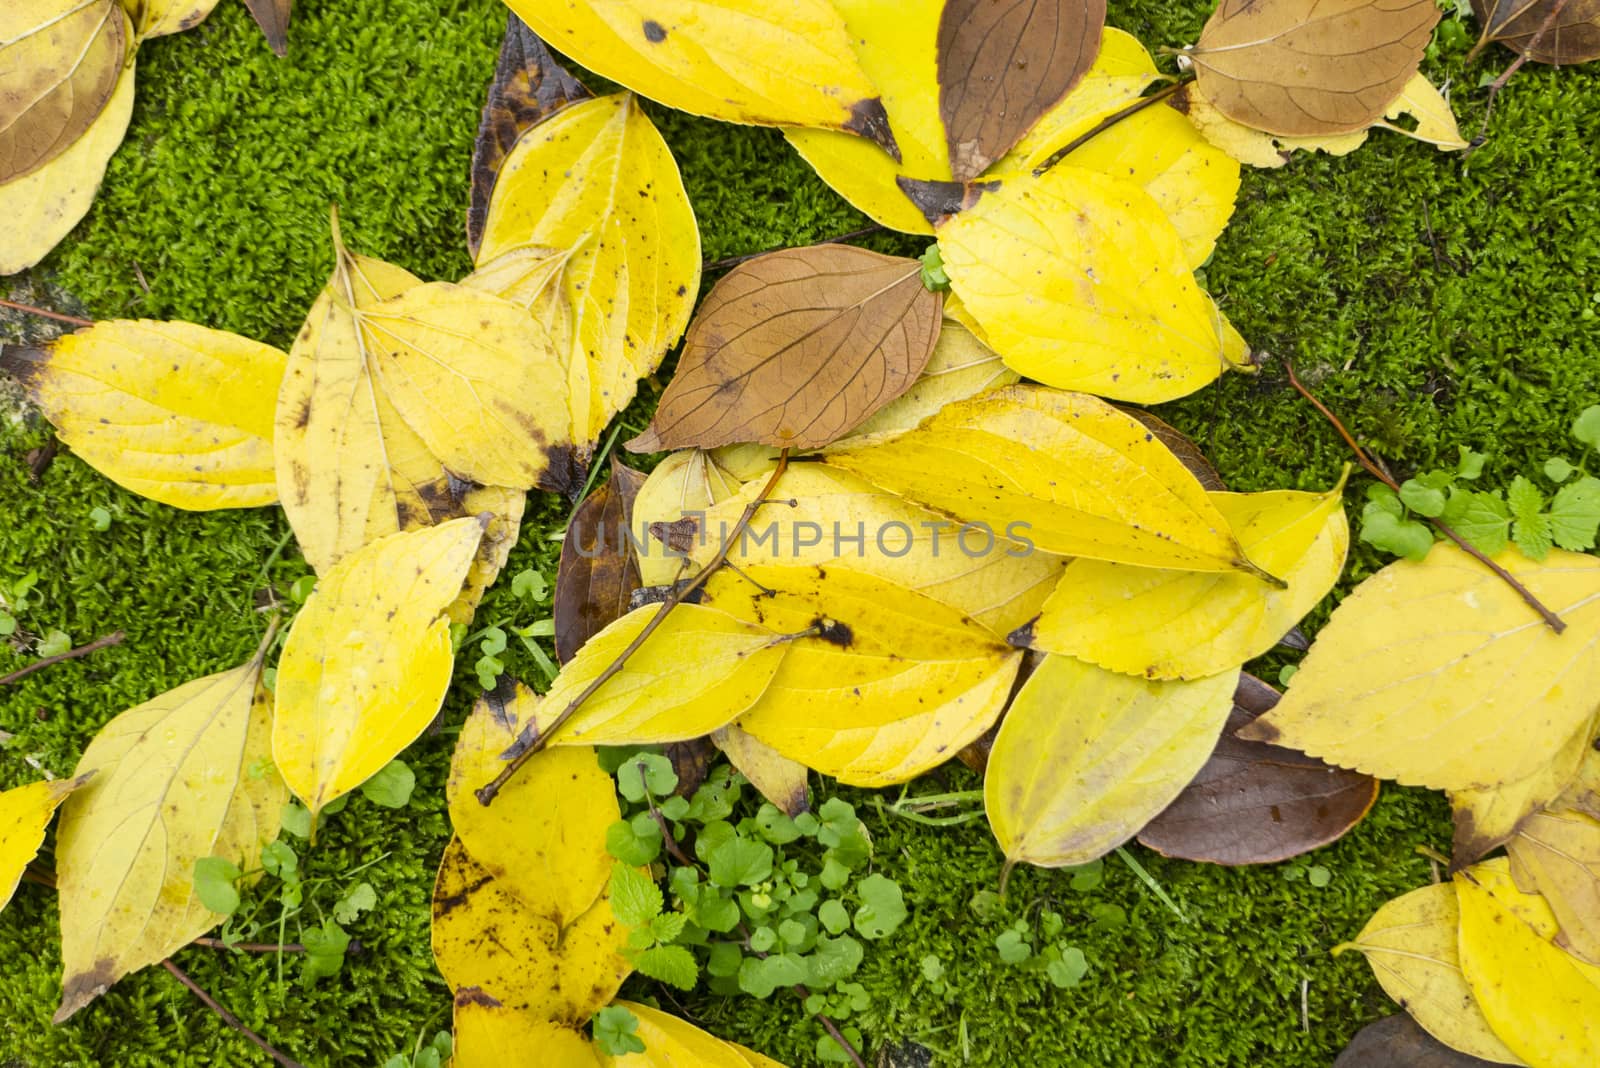 Details of nature in Autumn by AlessandroZocc